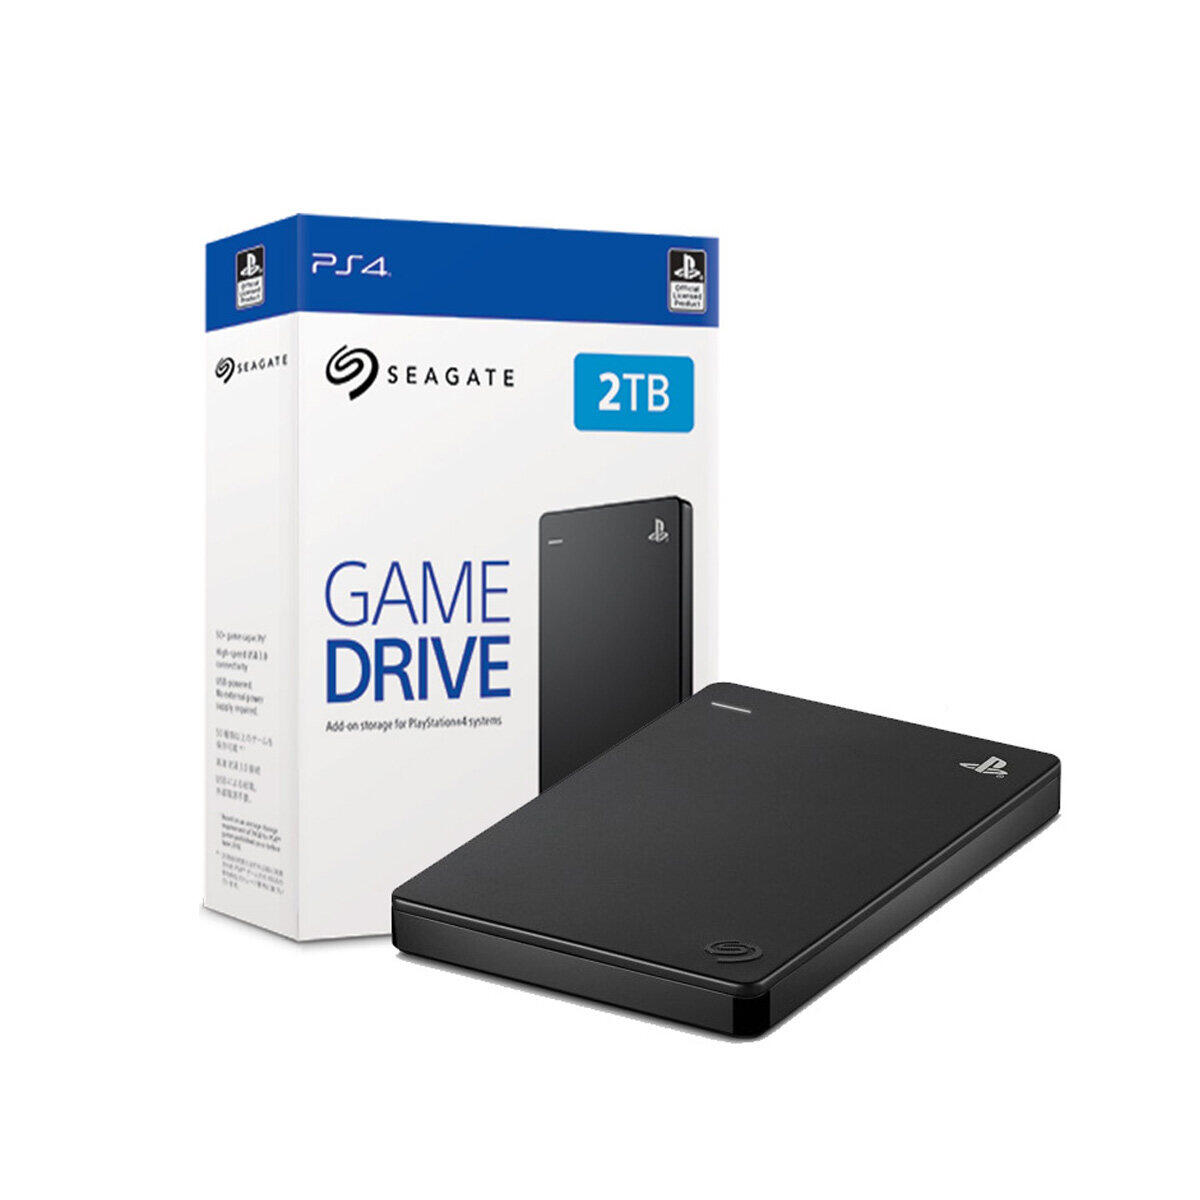 Ps4 4tb SSD. Seagate ps4 4tb cheap sell - off 79. Seagate PLAYSTATION (stgd2000300. Seagate game Drive for ps4 4tb.